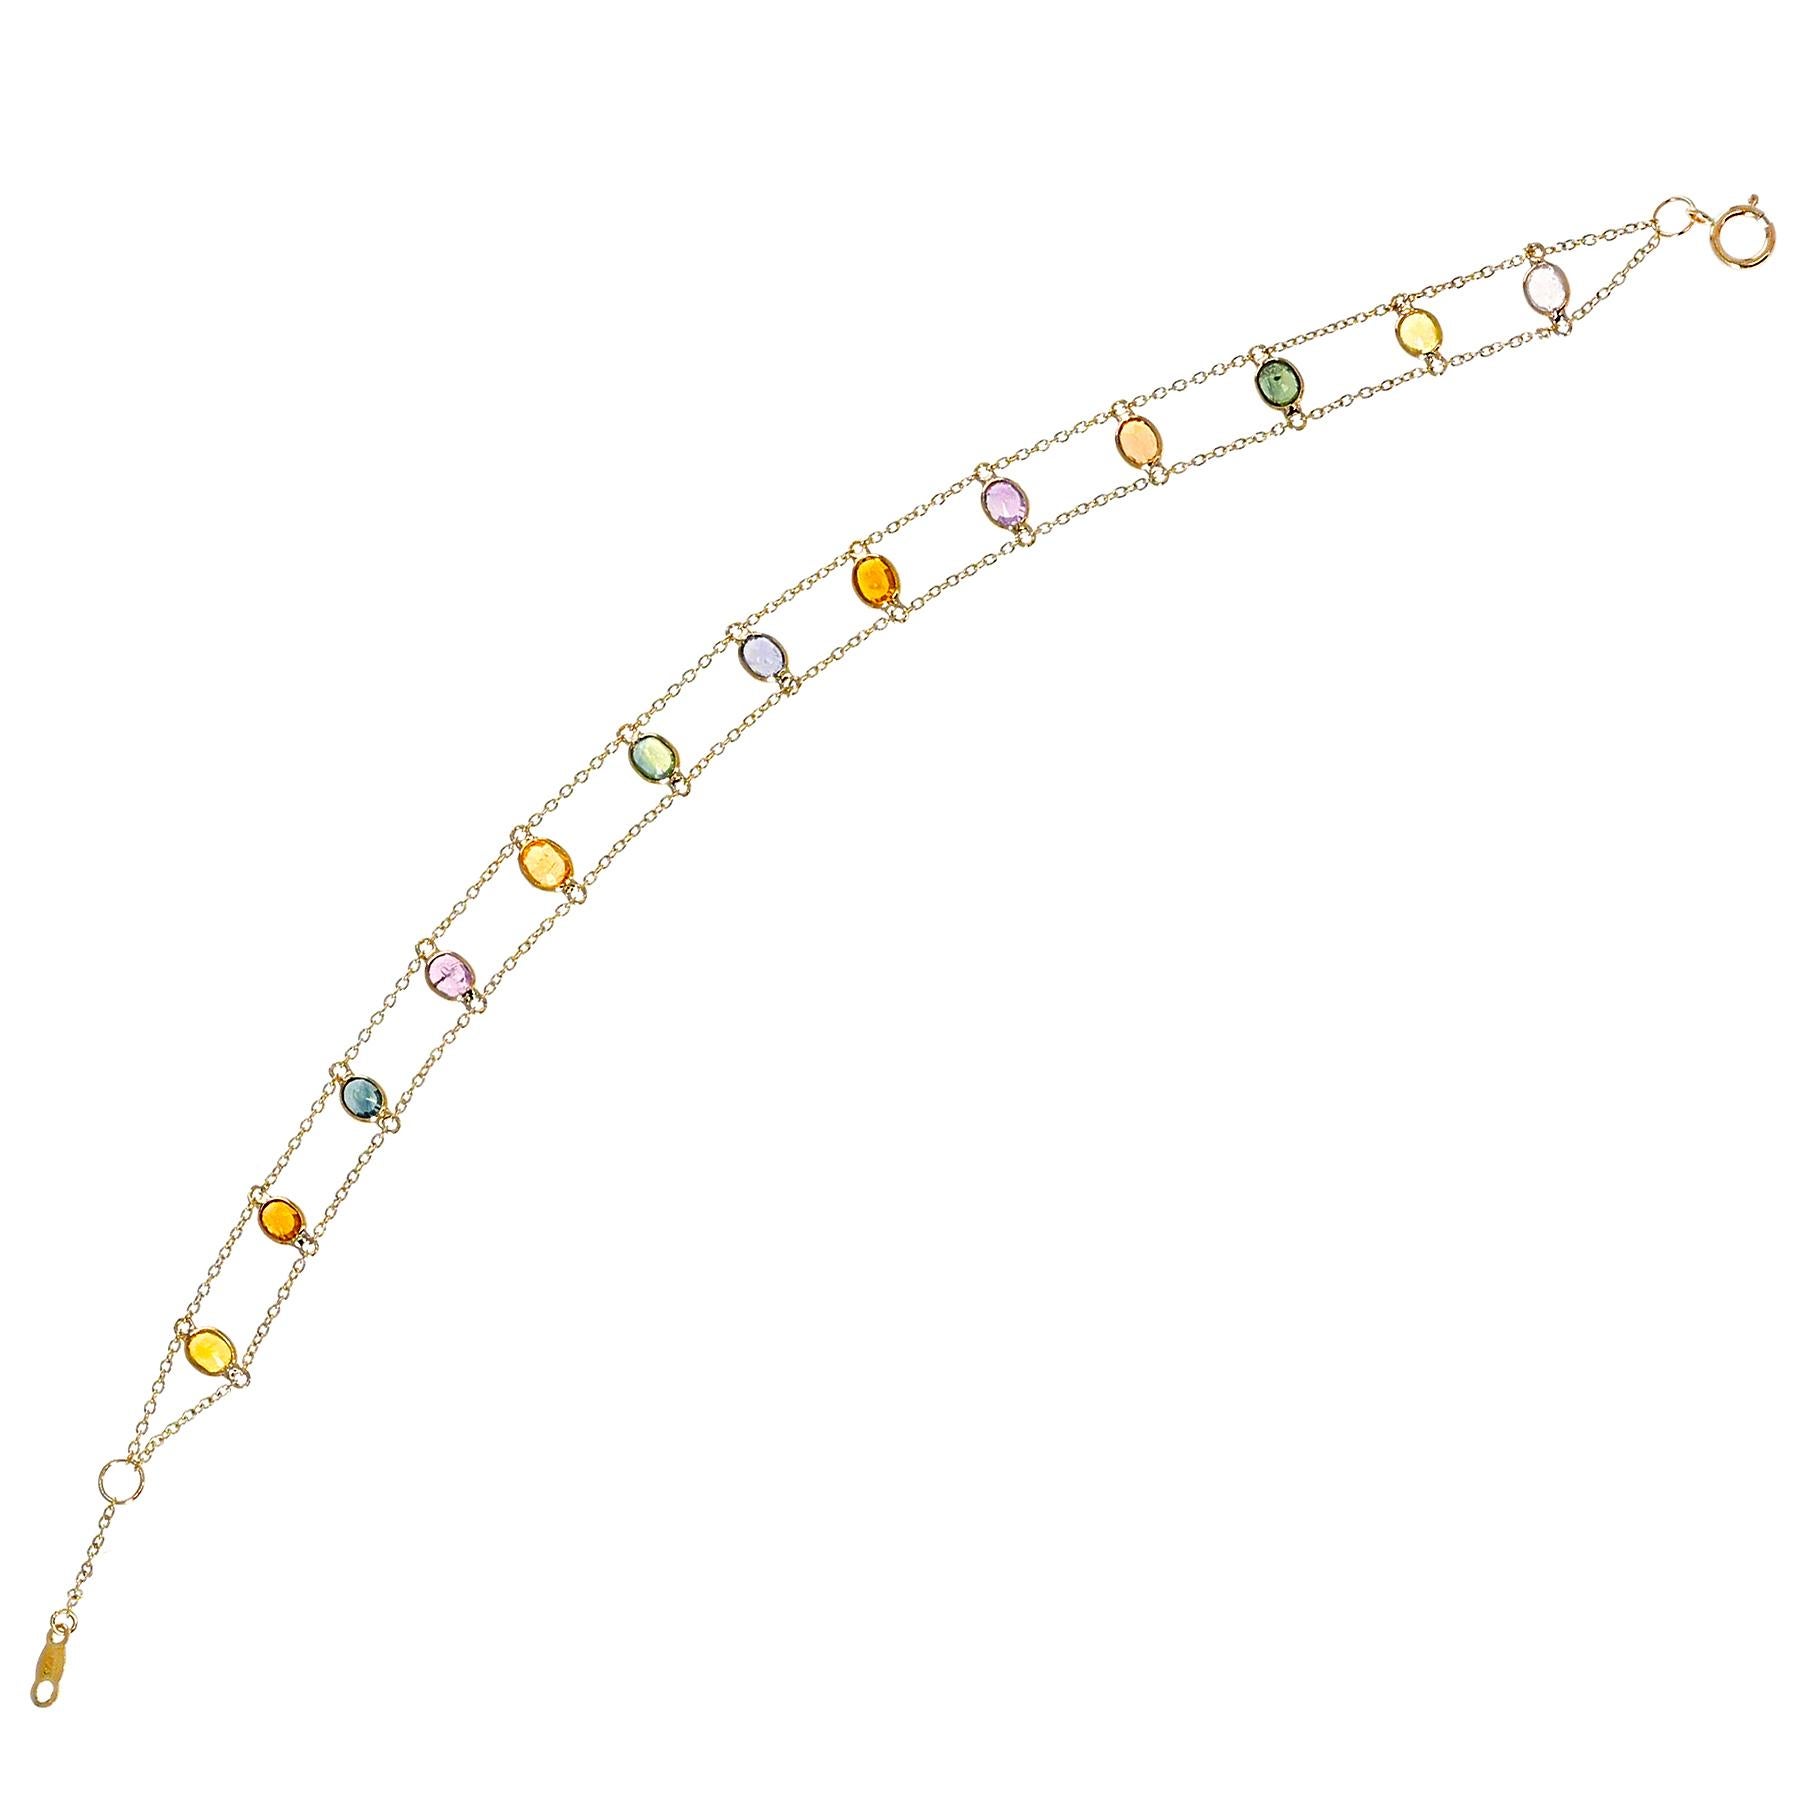 A 3 x 4 Oval Genuine Multi-Sapphire 18k Yellow Gold Bracelet. The length of the bracelet is 7.50.